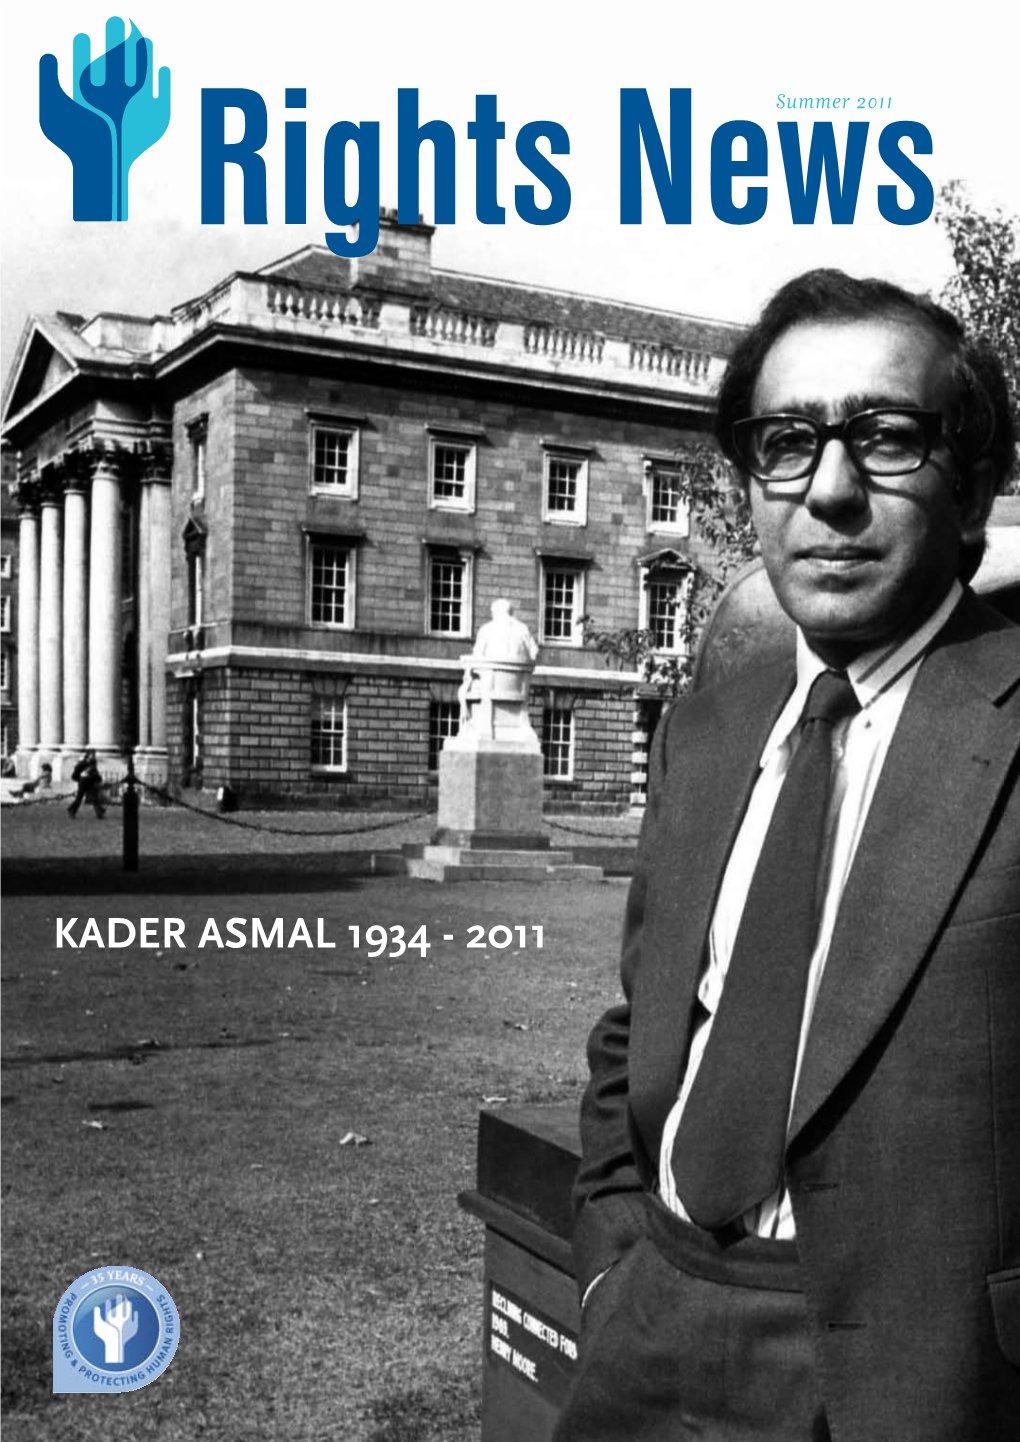 Kader Asmal 1934 - 2011 About the ICCL Message from the Director